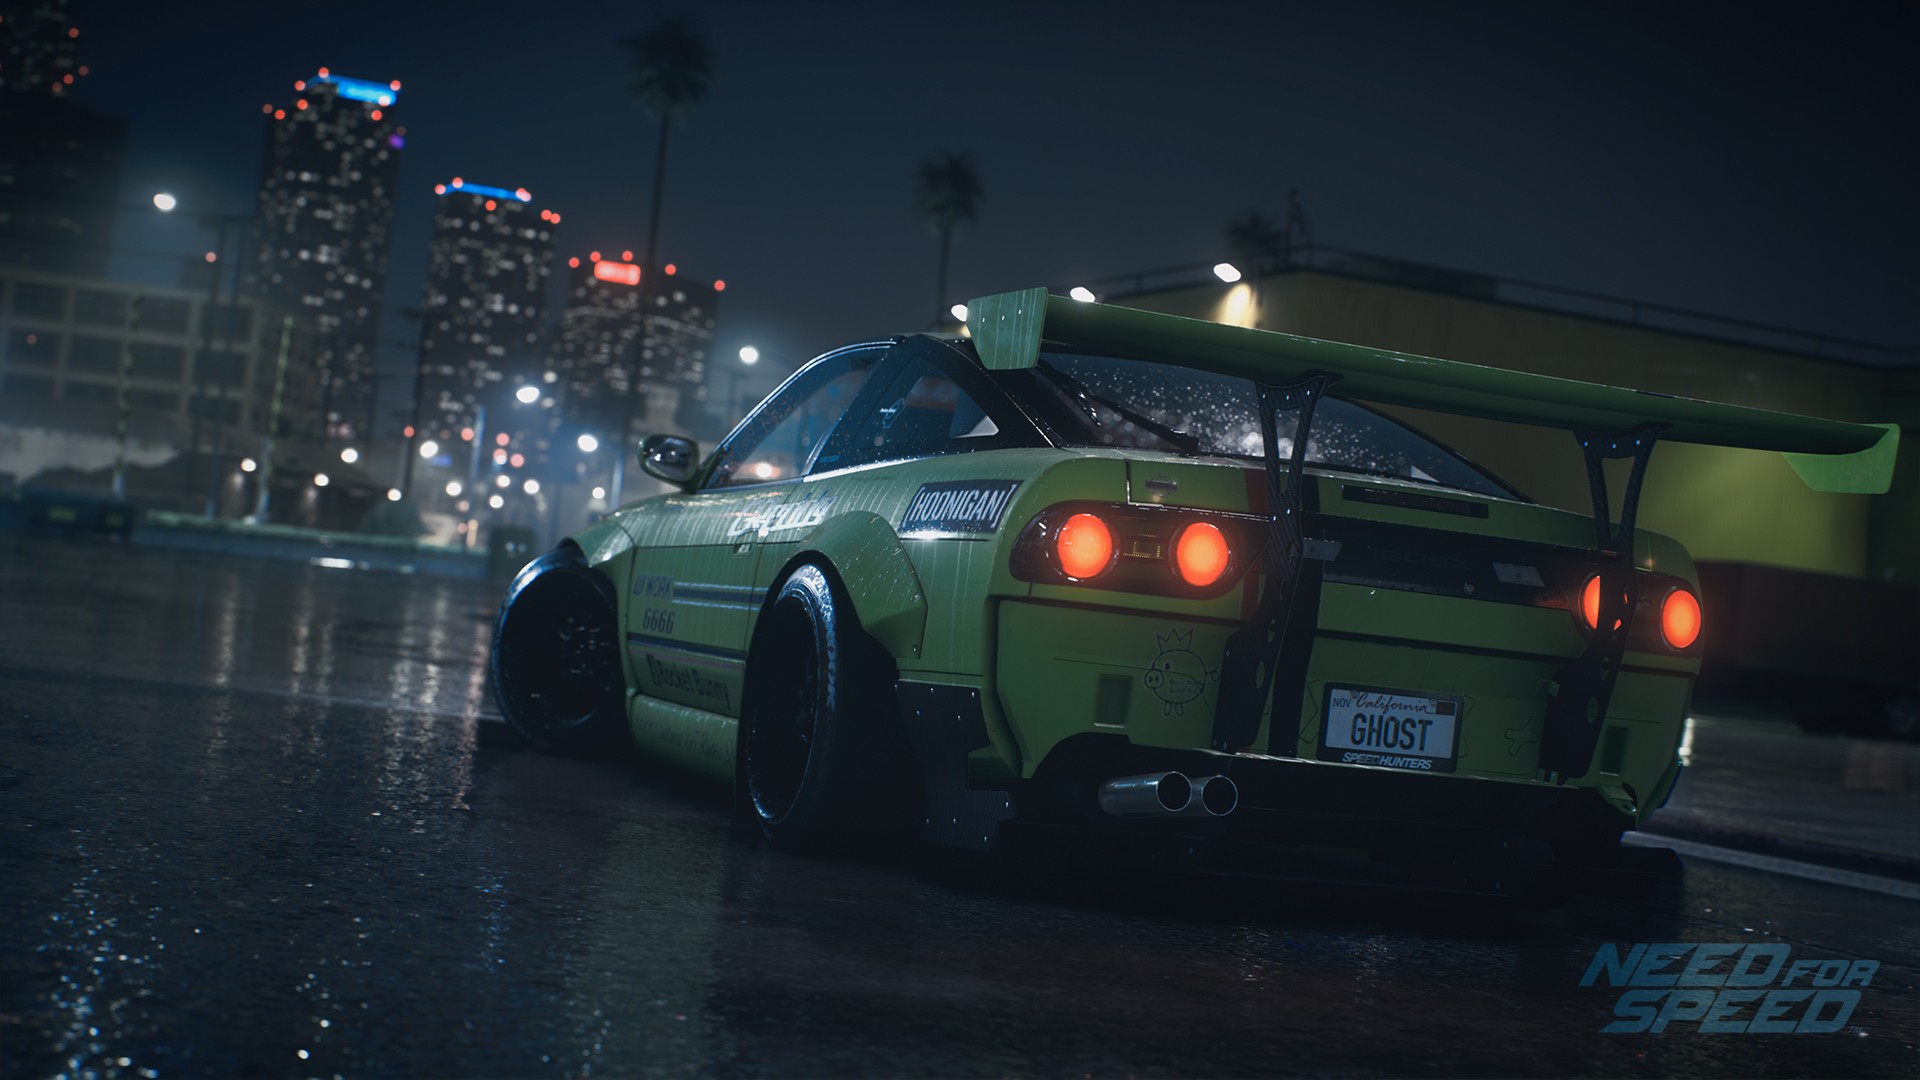 car, Need for Speed, Police cars, Trees, Road, Tail light, Spoilers, City, Modified Wallpaper